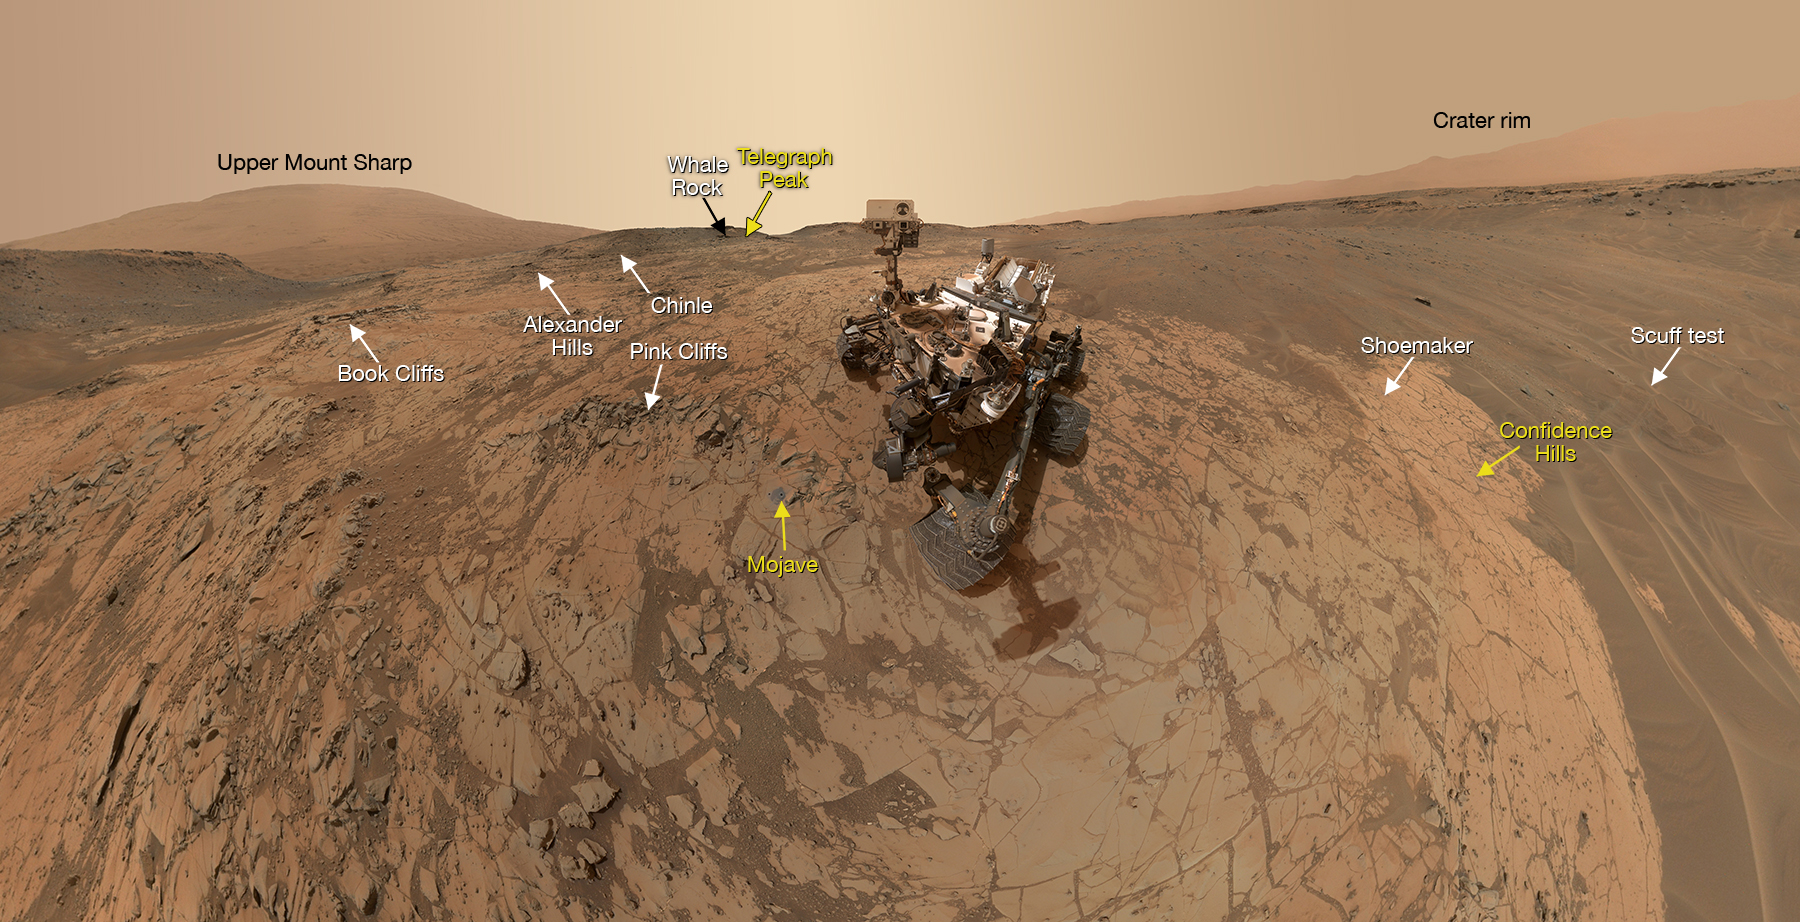 Self-portrait of the Curiosity rover in Gale Crater, Mars. The scientific investigation of this part of Mars combines information from orbital assets and rover observations. 